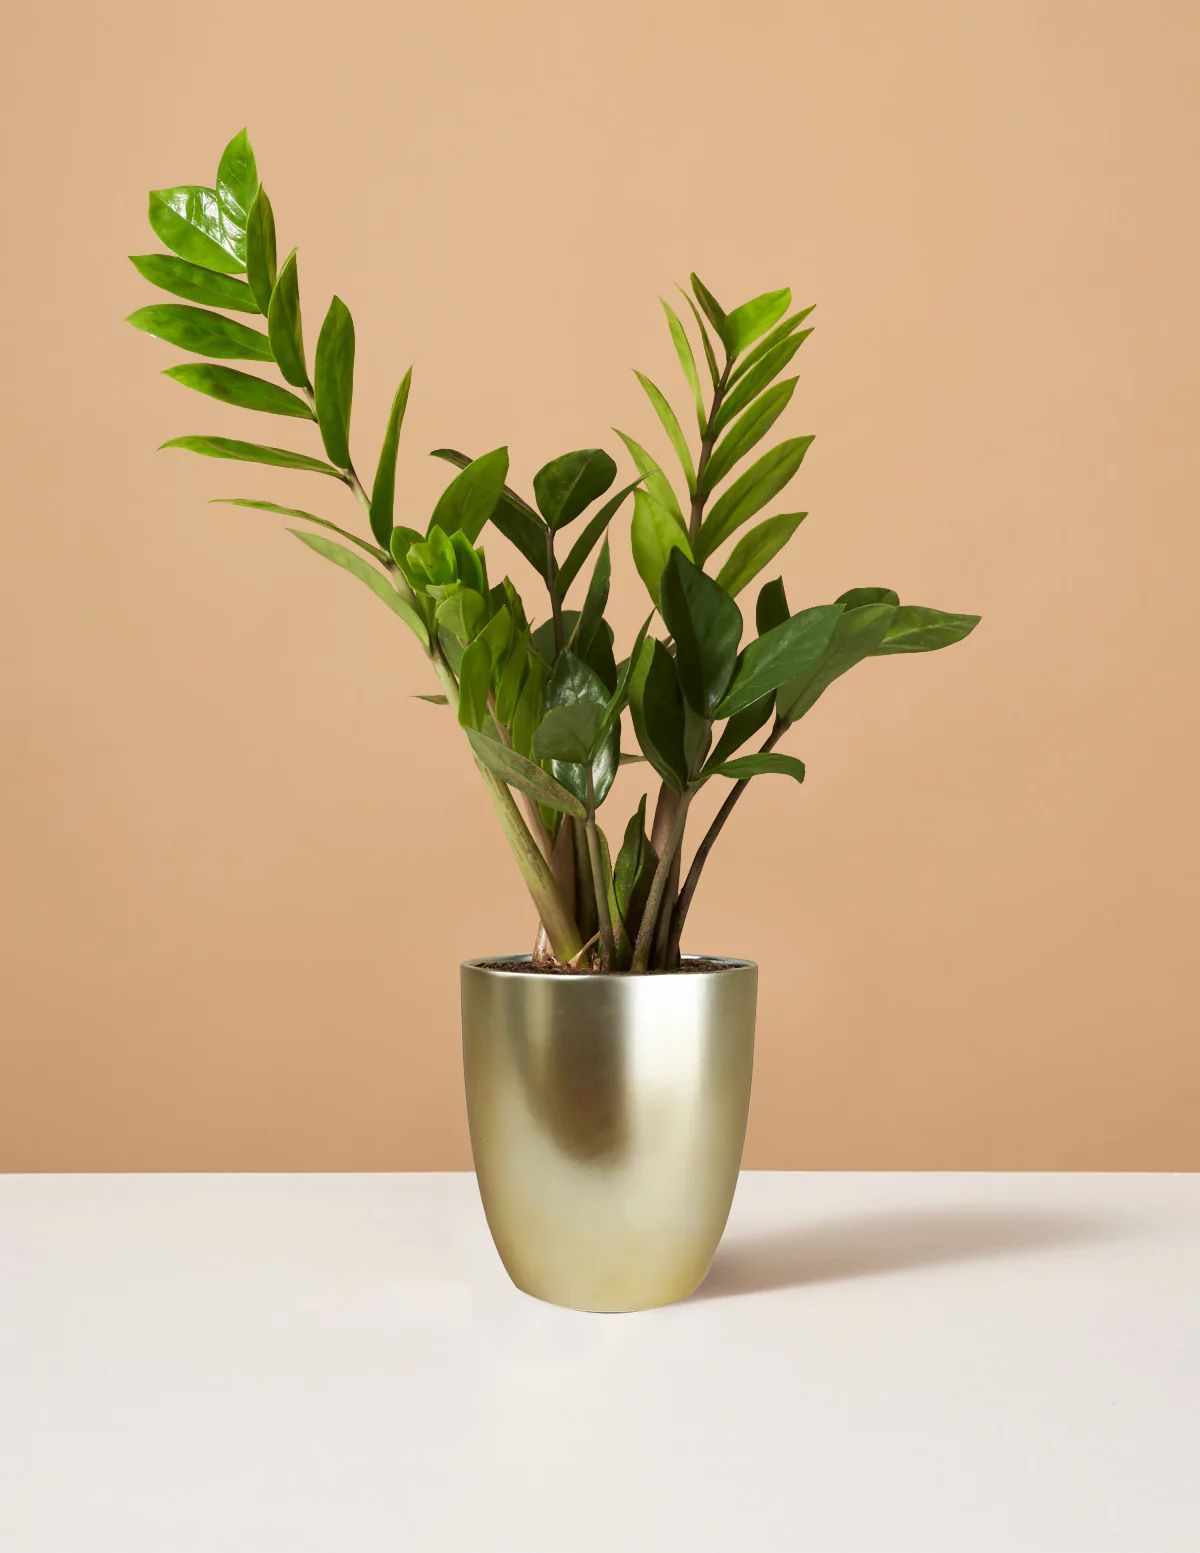 ZZ Plant | The Sill